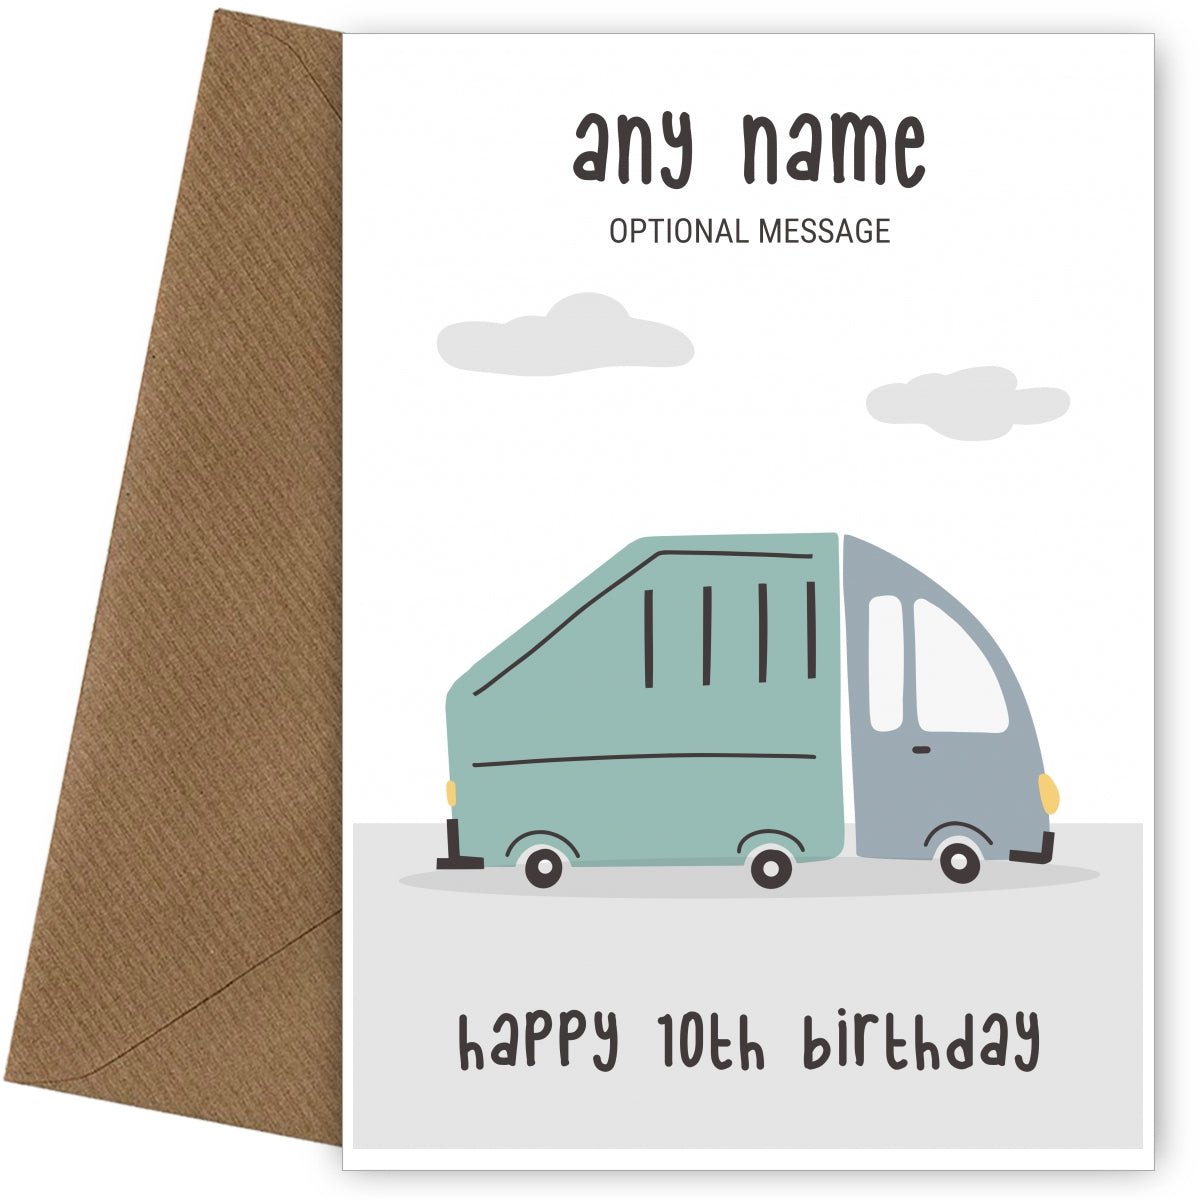 Fun Vehicles 10th Birthday Card for Any Name - Garbage Truck